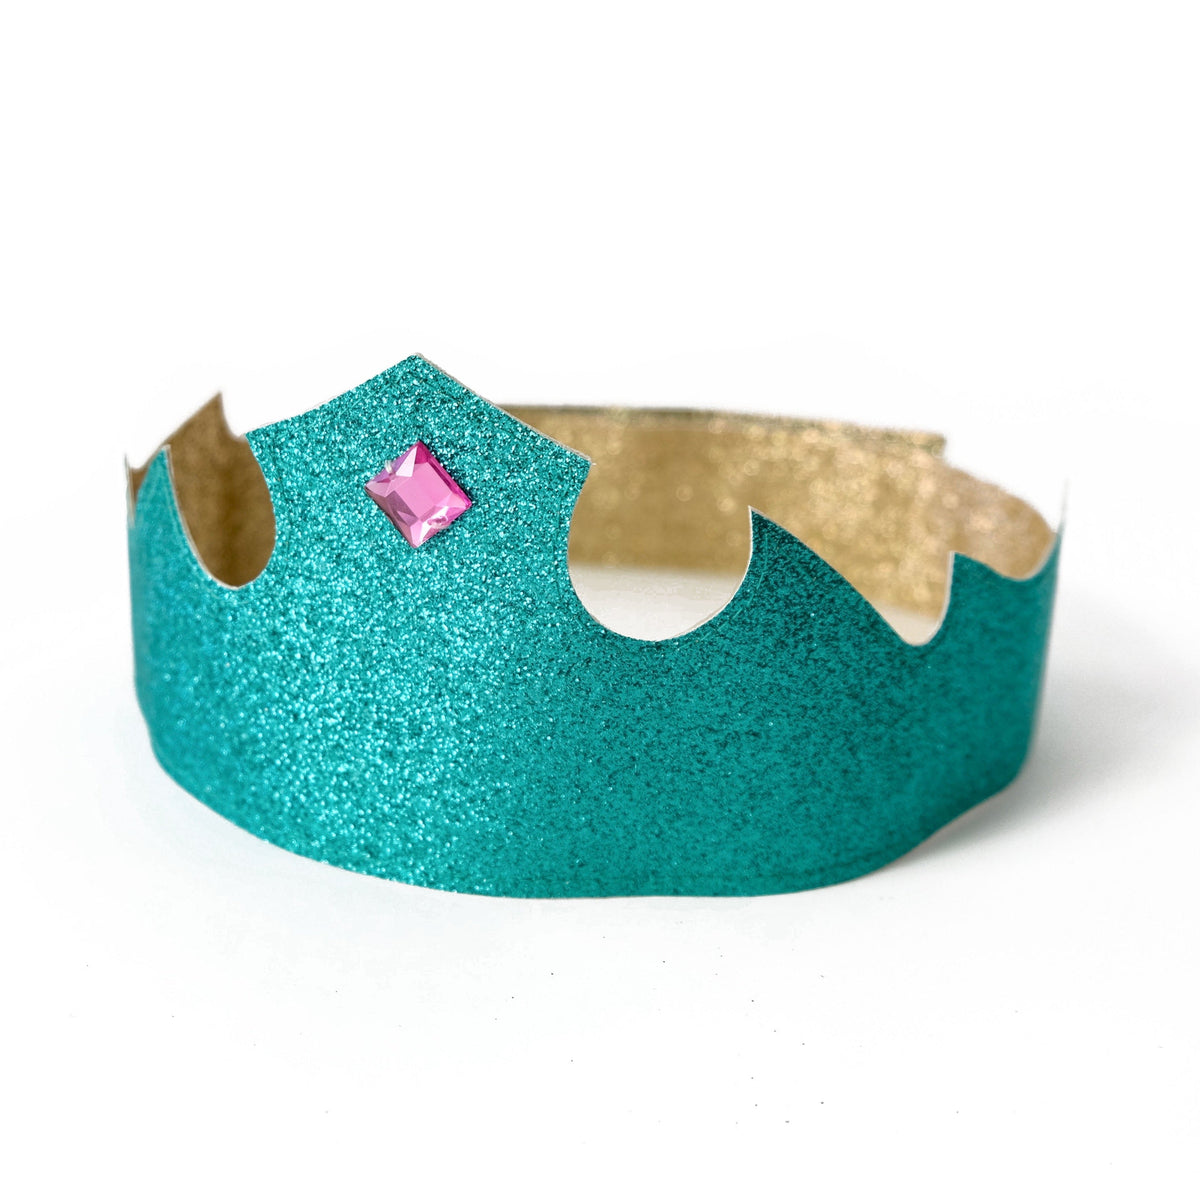 A unique birthday or pretend-play crown for your favorite little girl of boy.  Gold on one side and blue-green on the other.